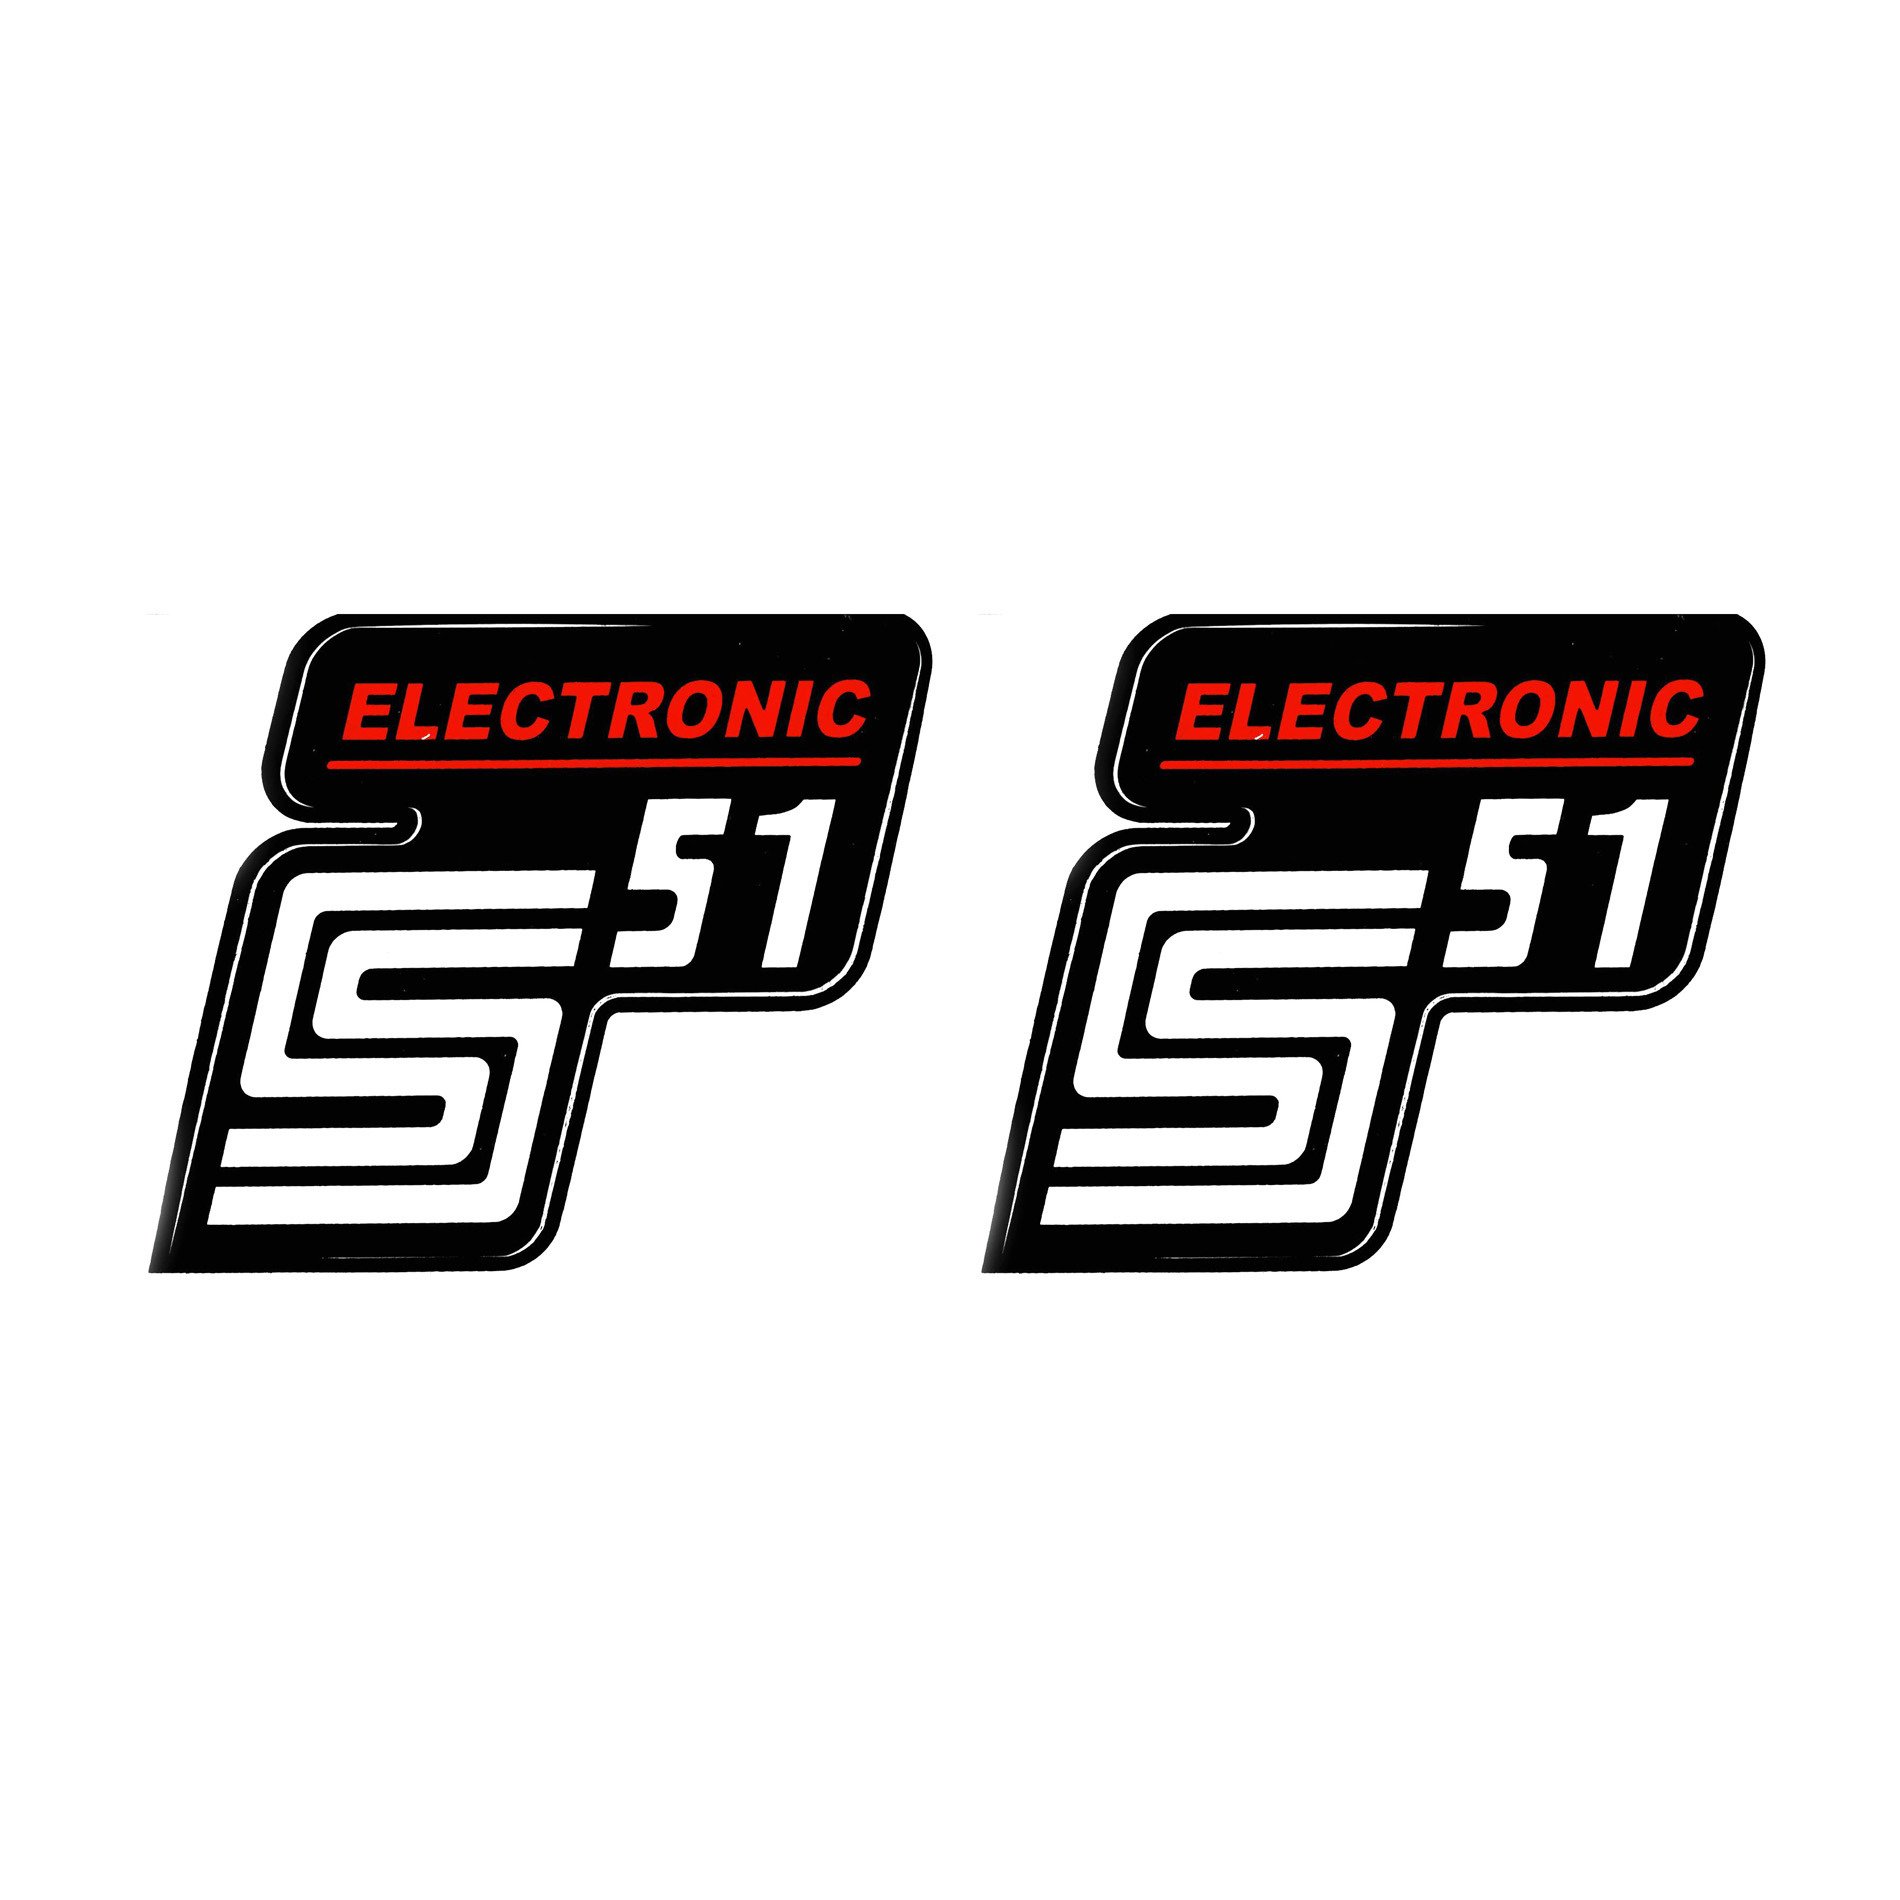 2x sticker for Simson S51 Electronic red-white